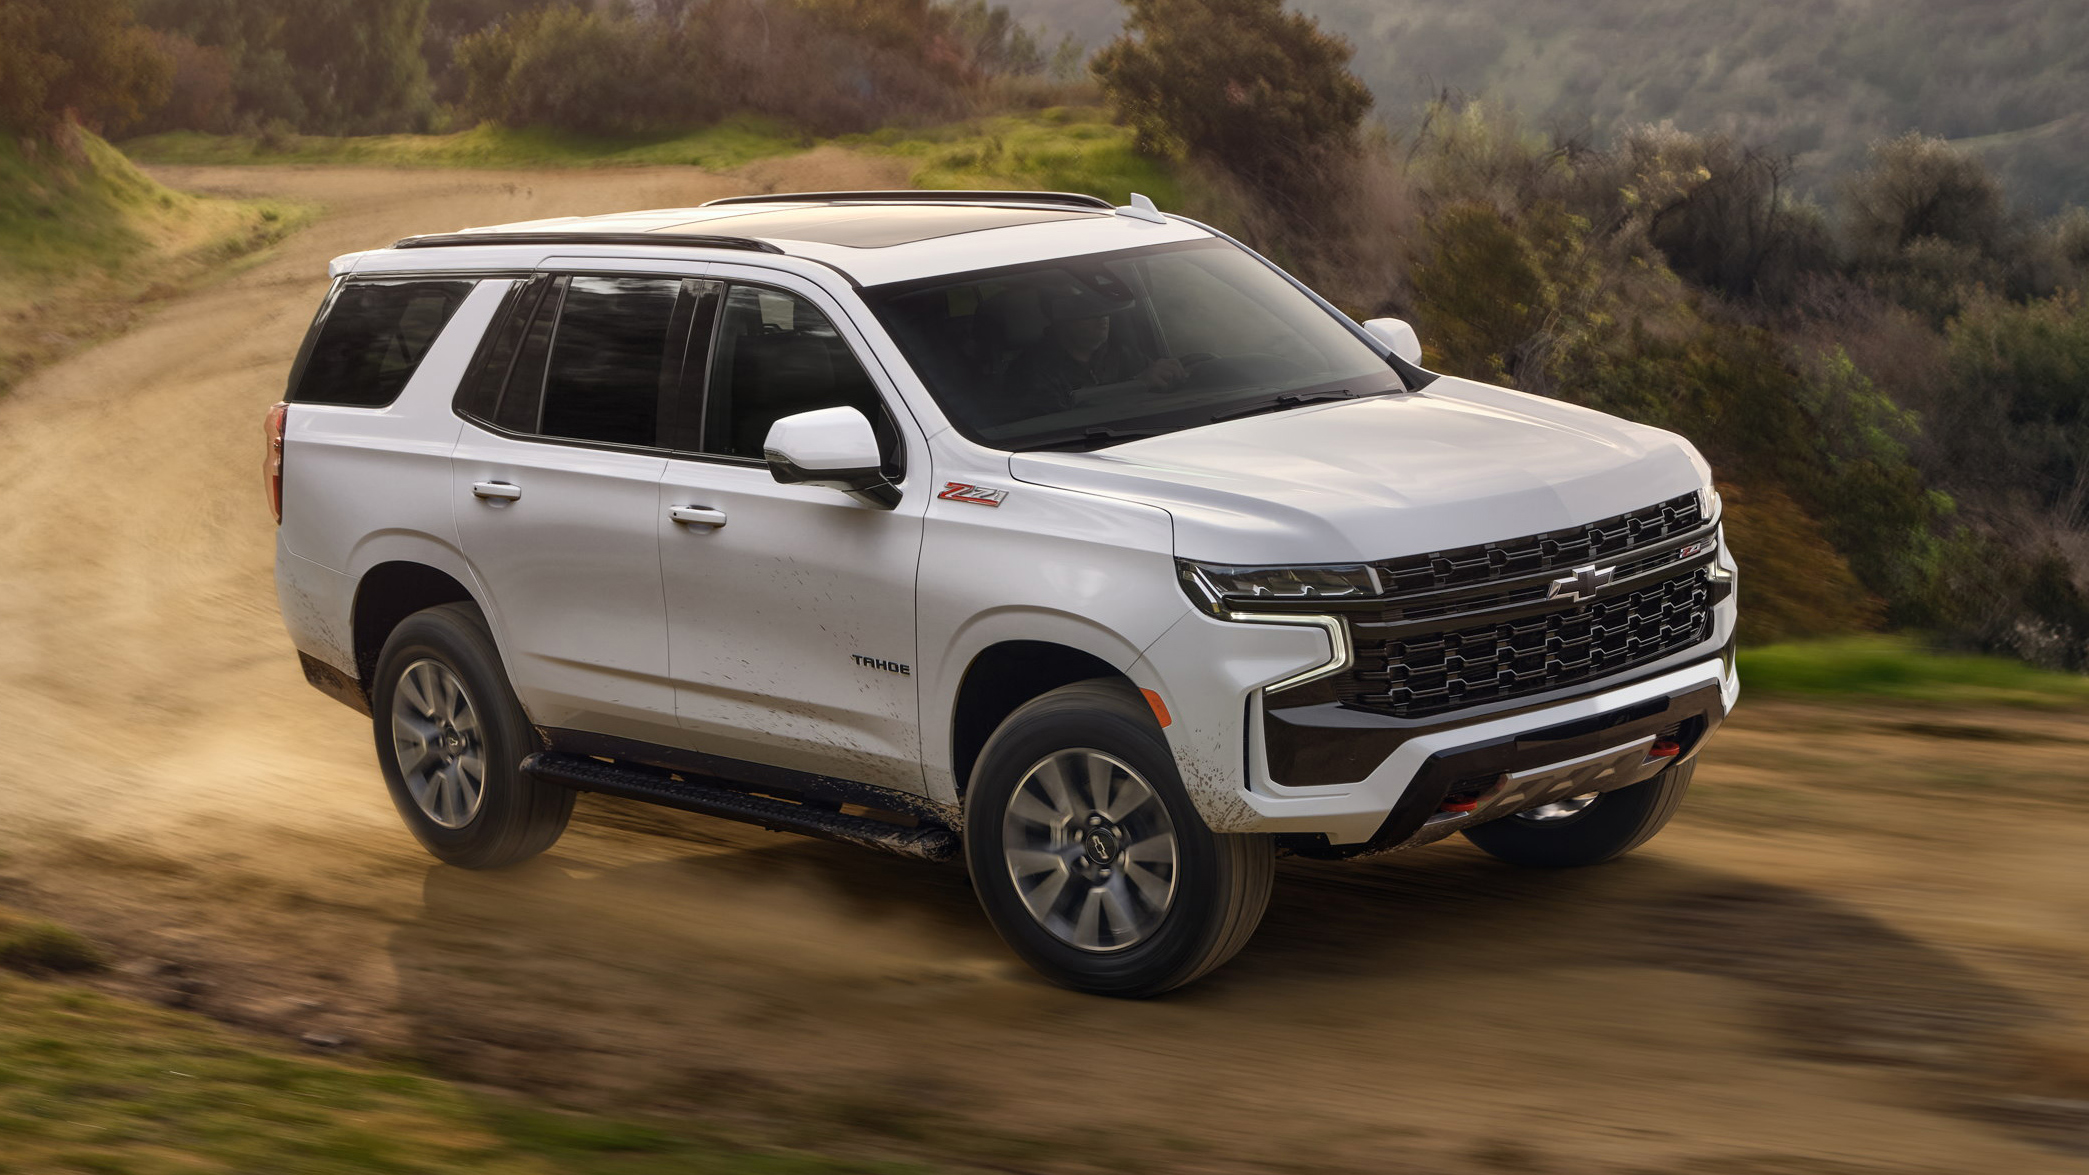 2021-chevy-tahoe-review-what-s-new-photos-driving-impressions